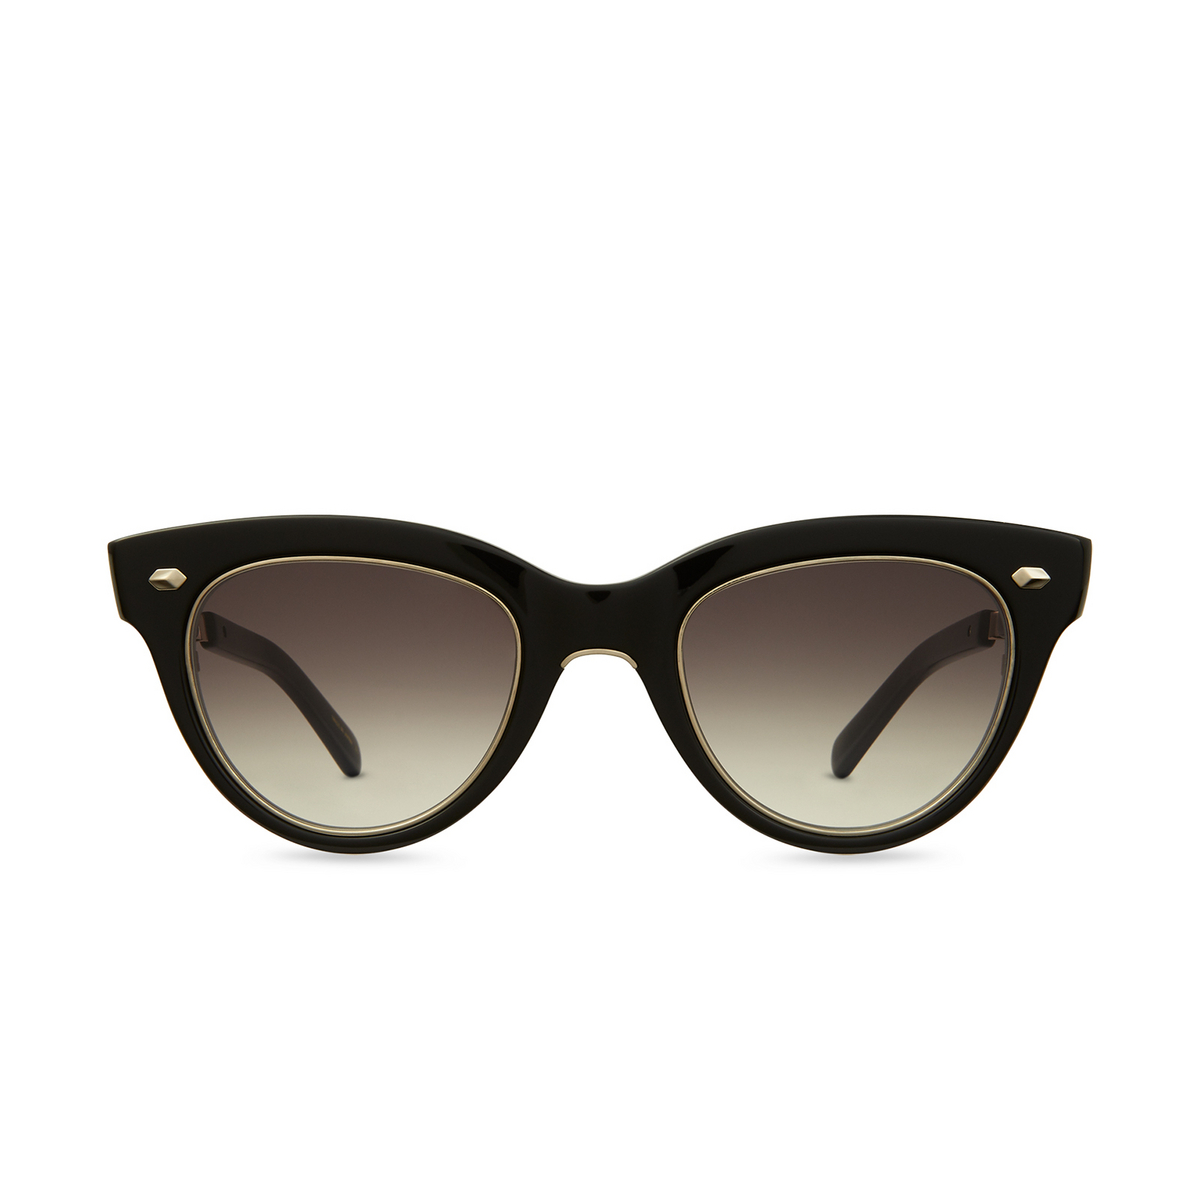 Mr. Leight MADISON S Sunglasses BK-12KG/SFBKG - front view